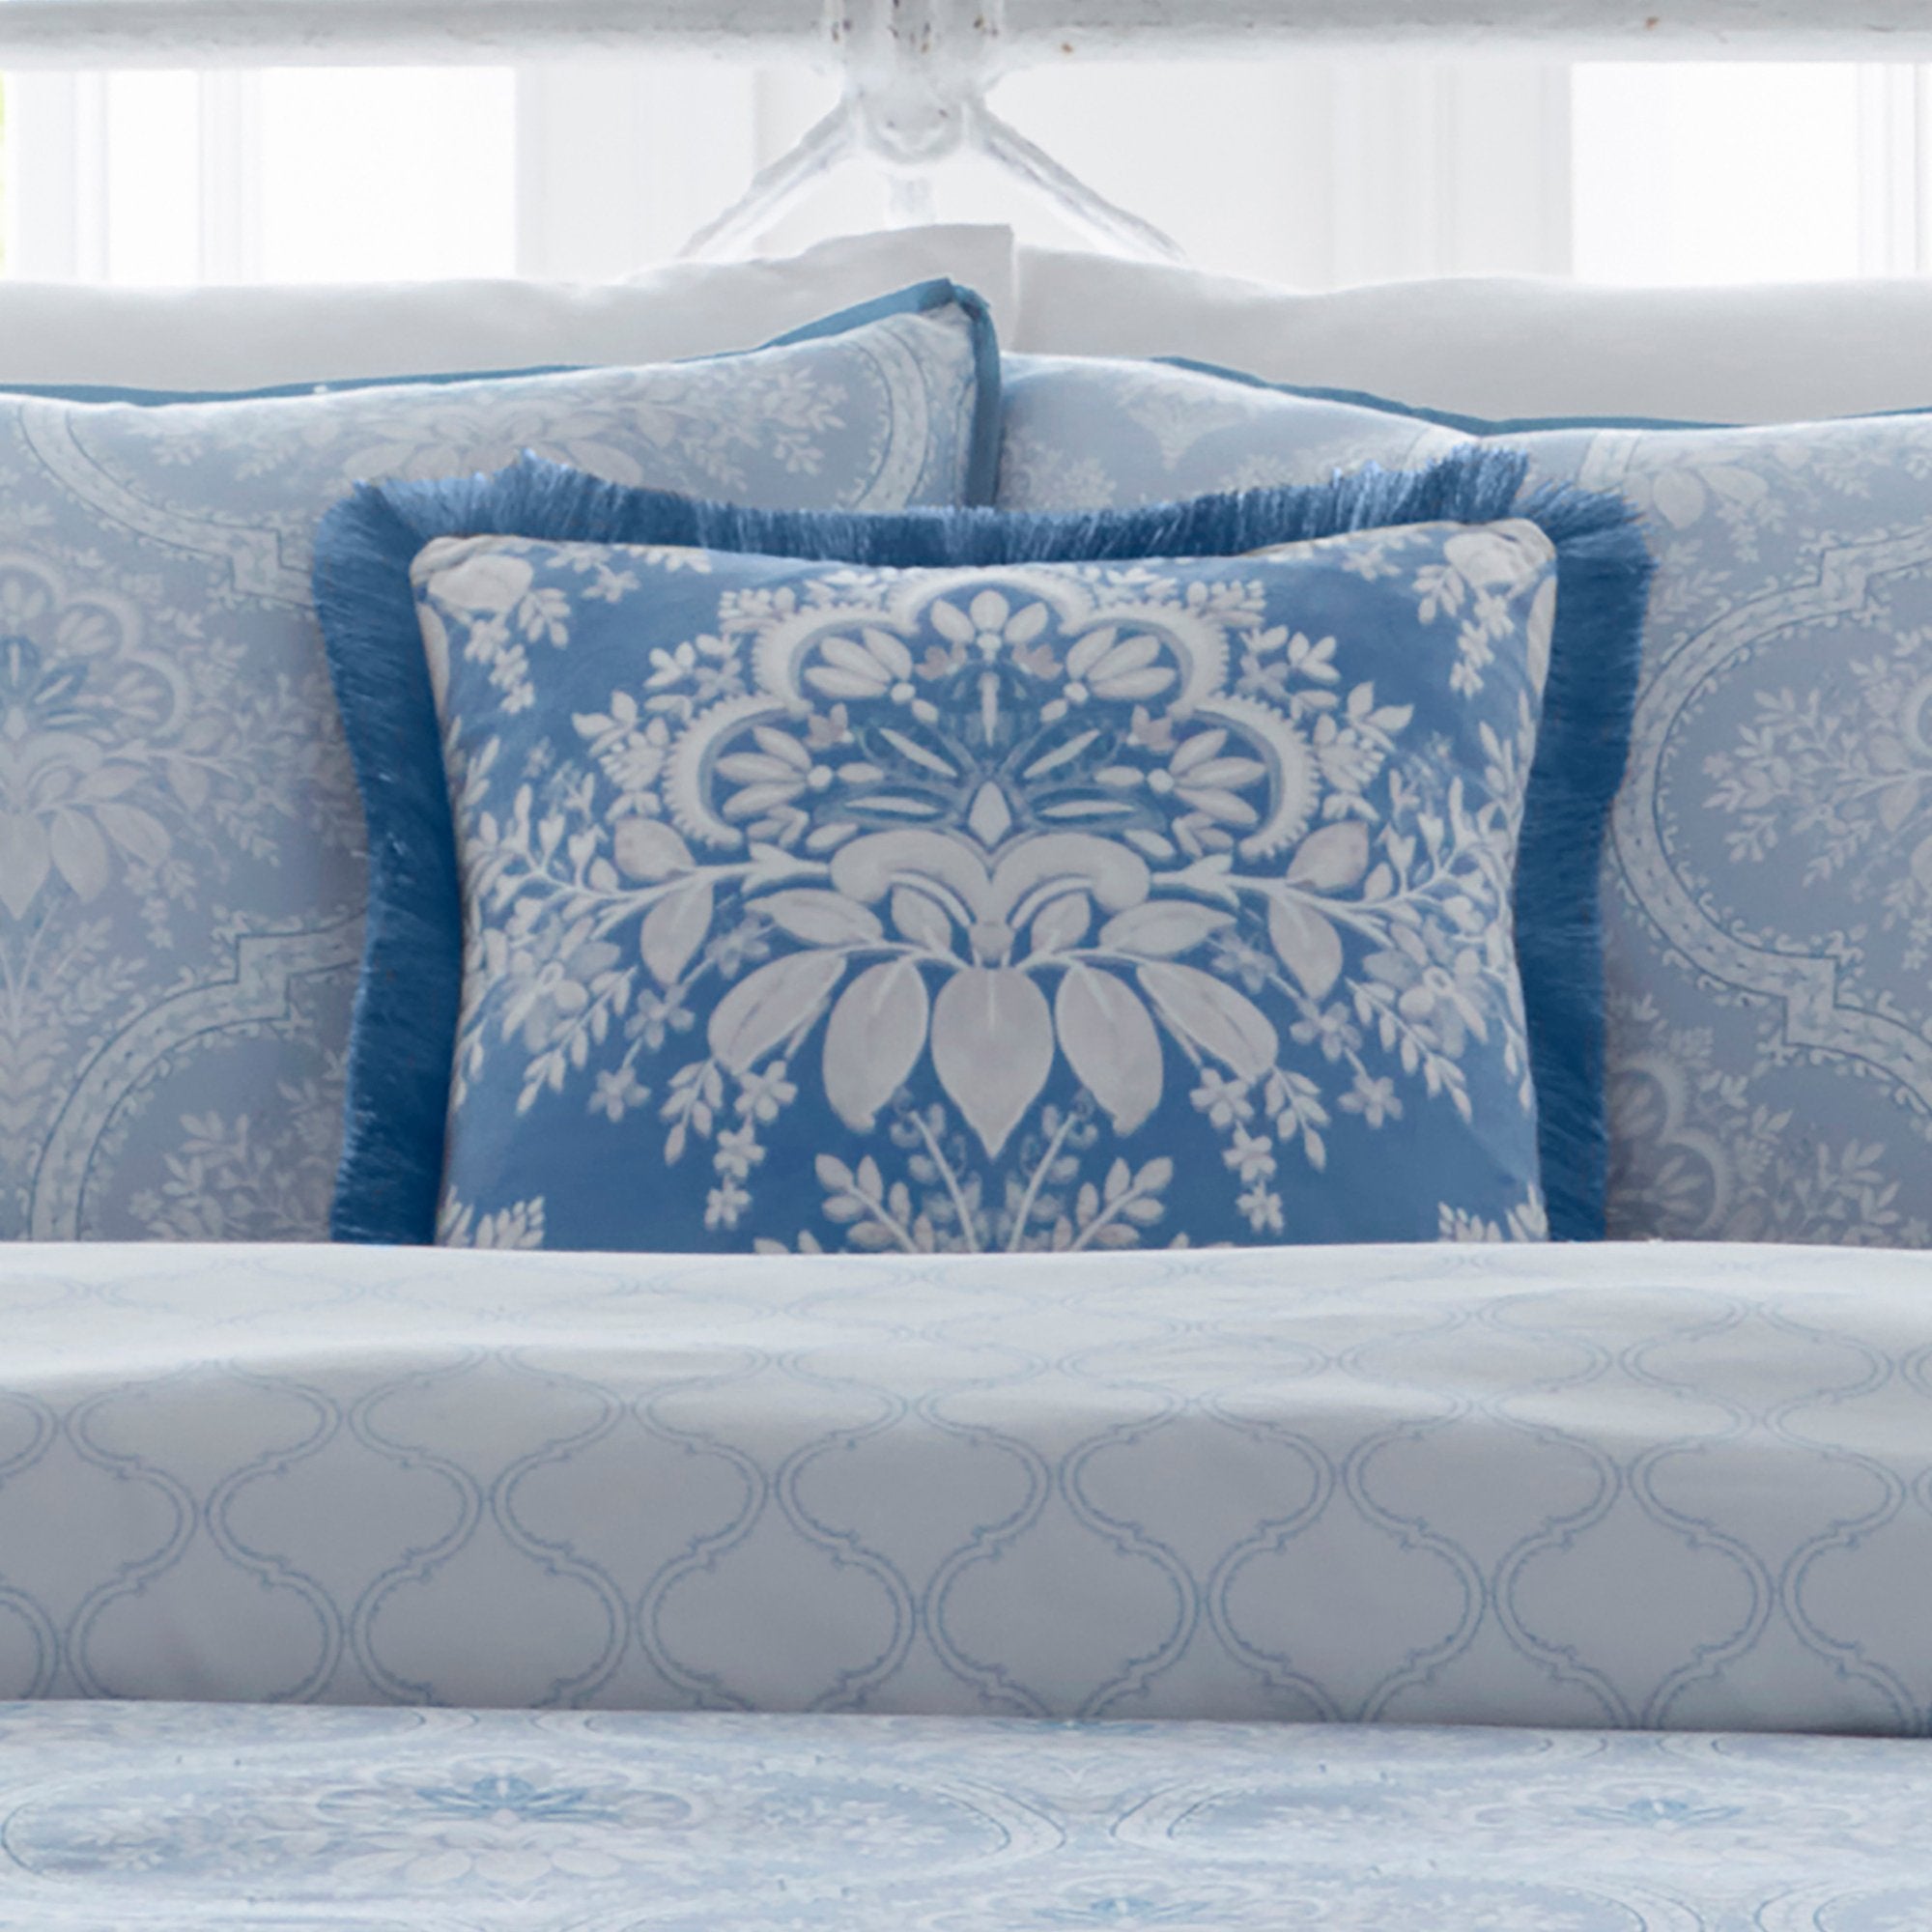 Cushion Alexia by Appletree Heritage in Blue